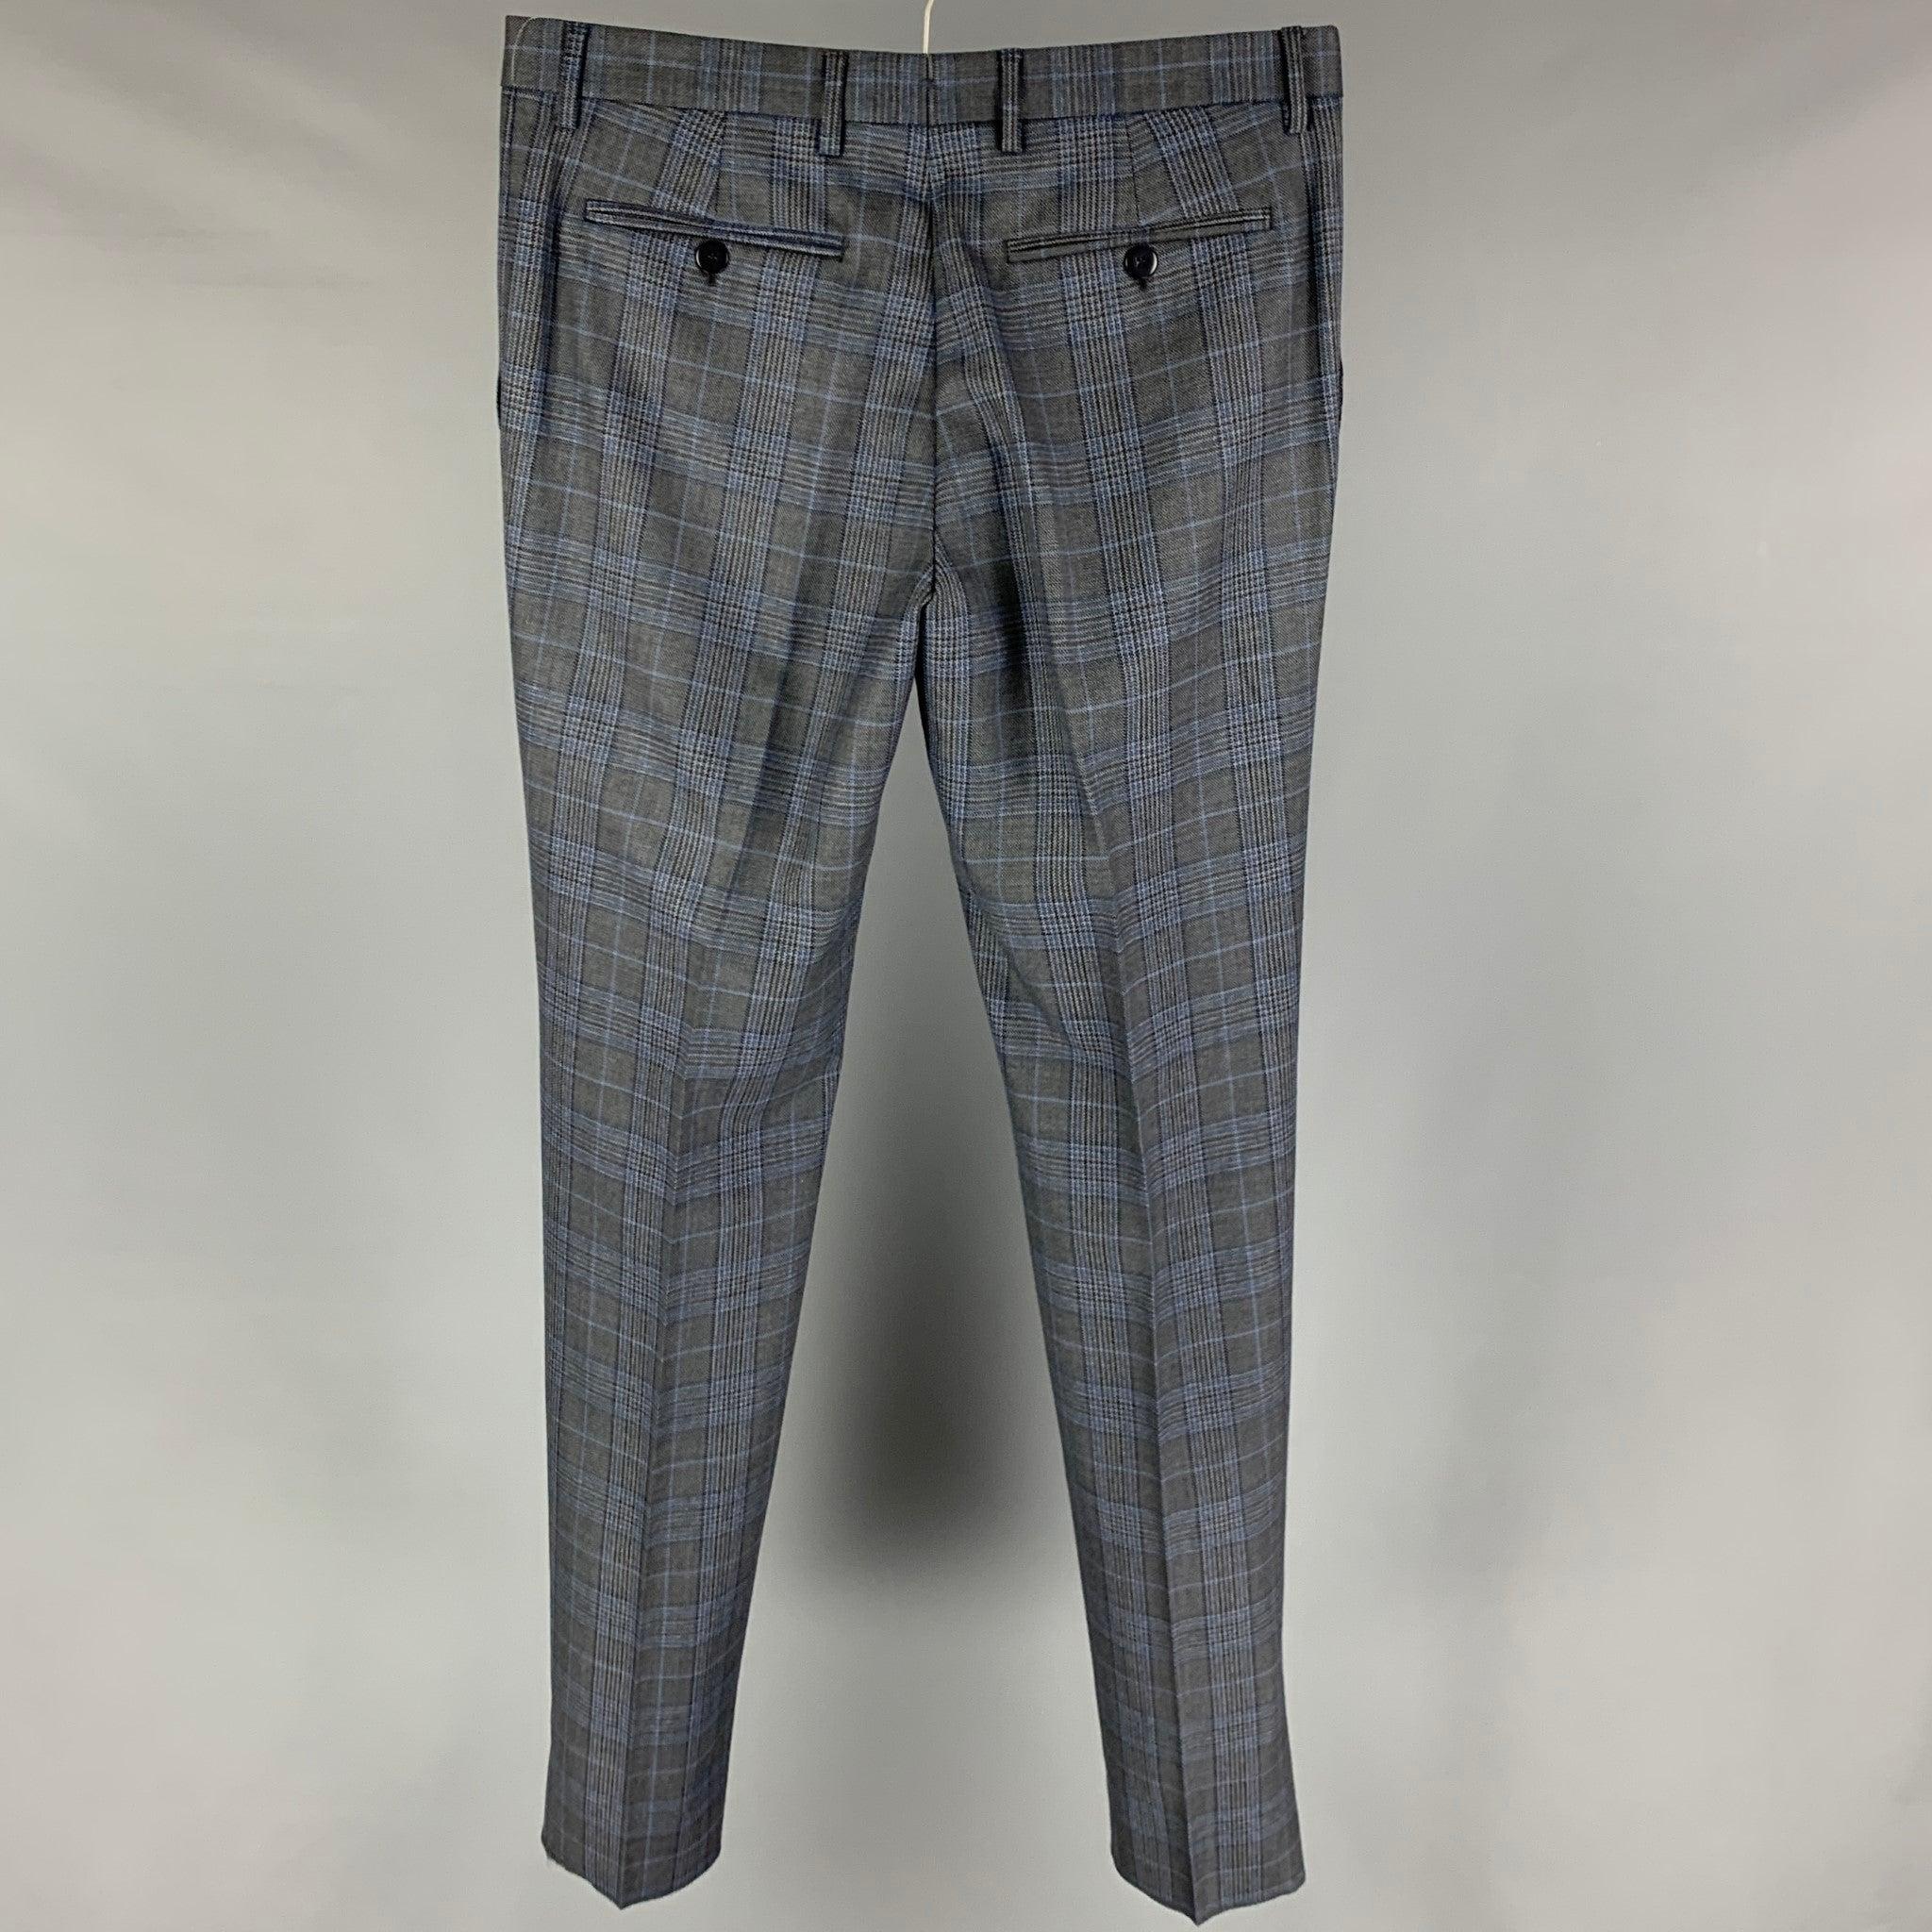 ETRO Size 32 Grey Blue Plaid Wool Dress Pants In Good Condition For Sale In San Francisco, CA